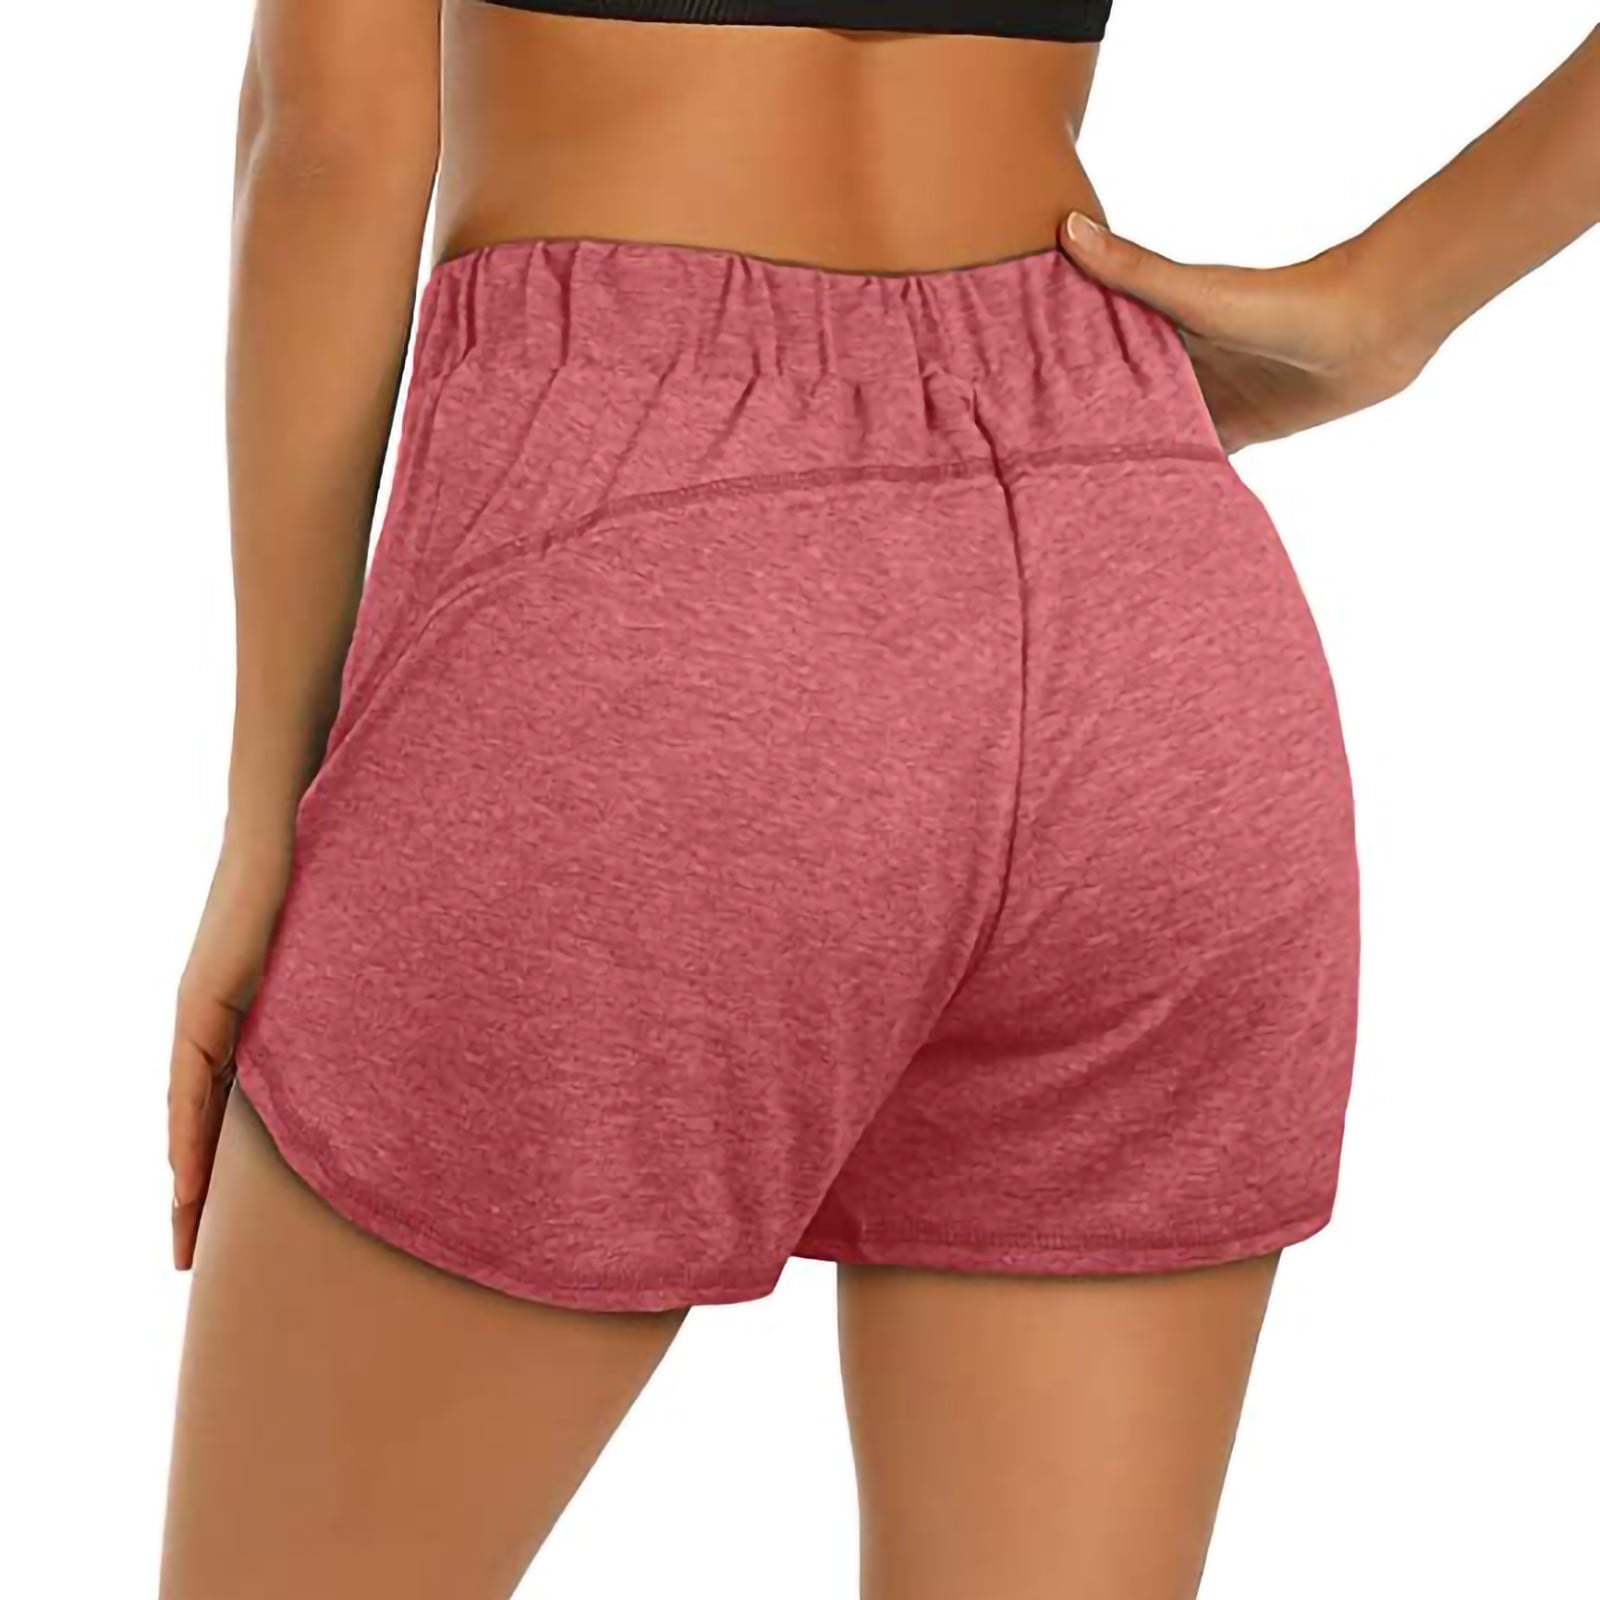 IZHH Women Elastic Waist Casual Running Fitness Workout Shorts with Side Pockets 